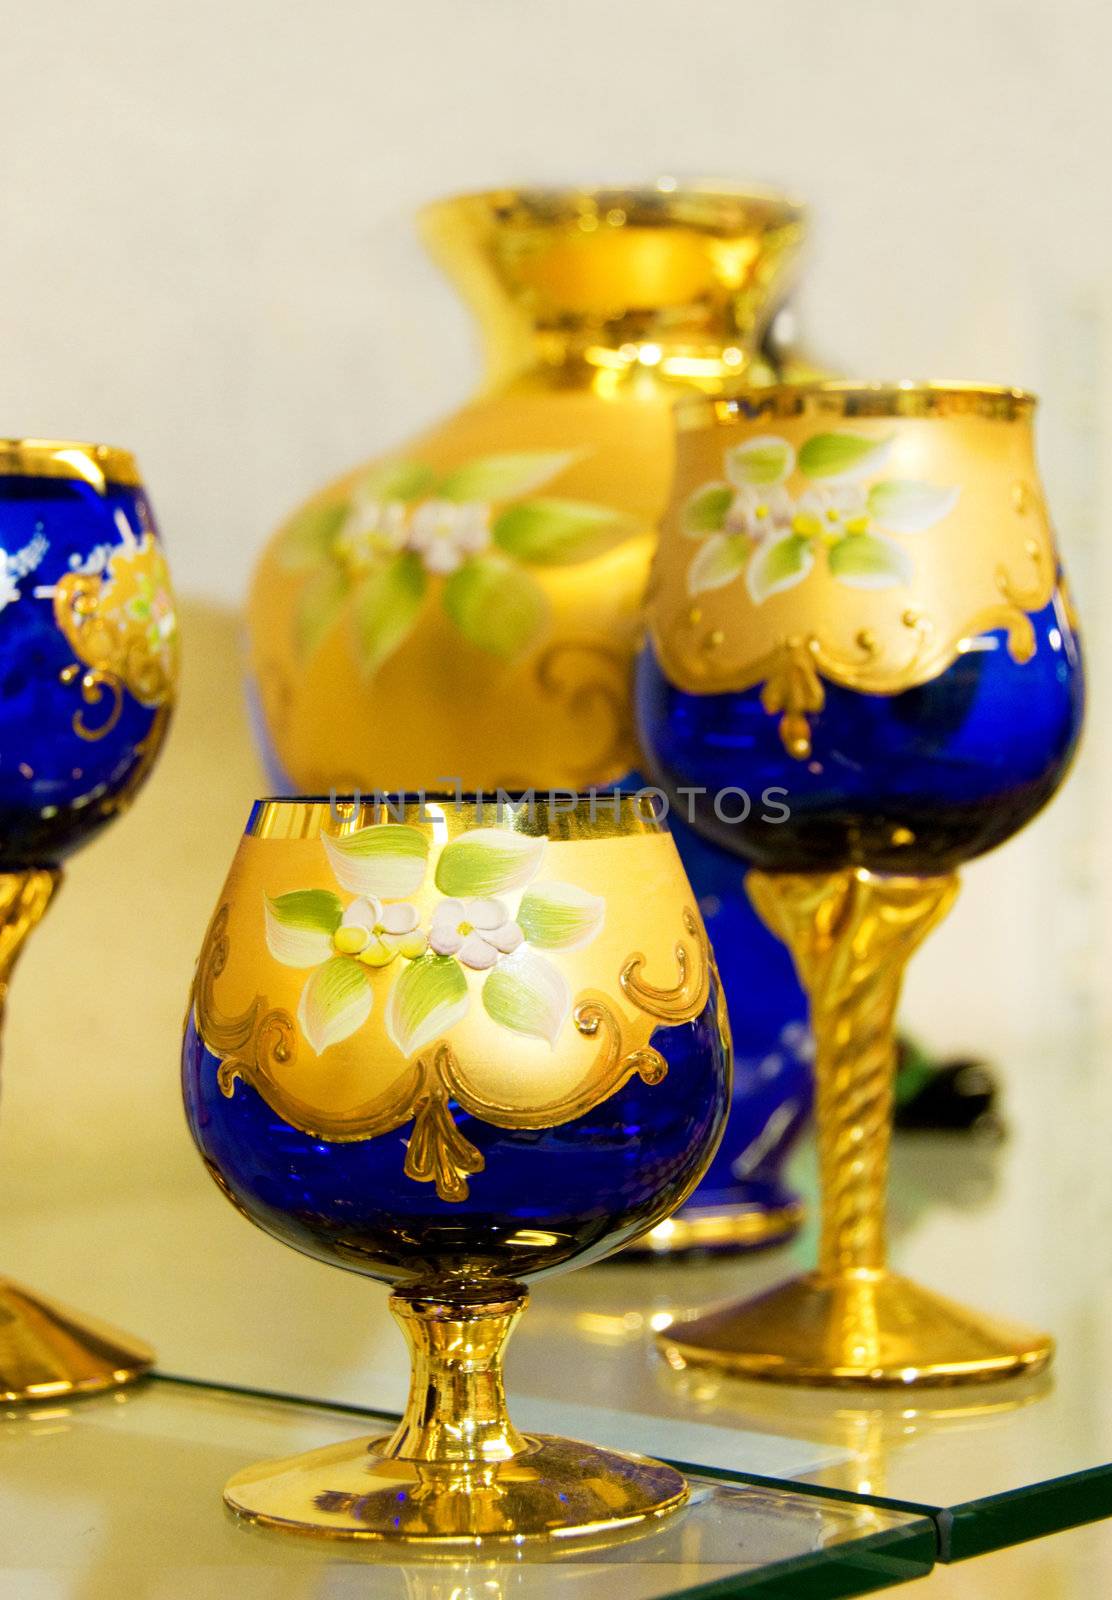 Blue hand-made glass covered with gold drawing by iryna_rasko